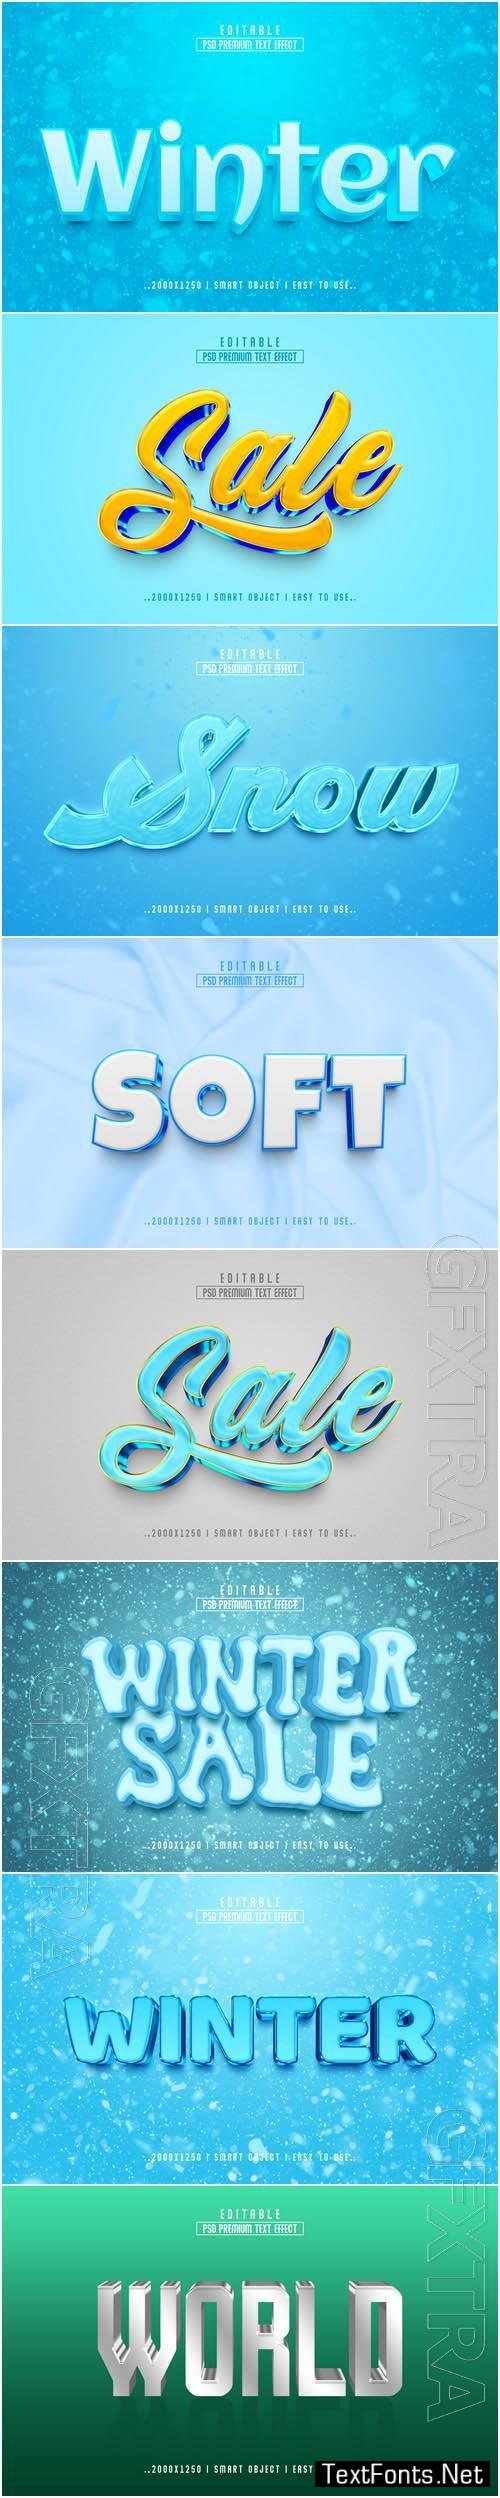 photoshop styles for text